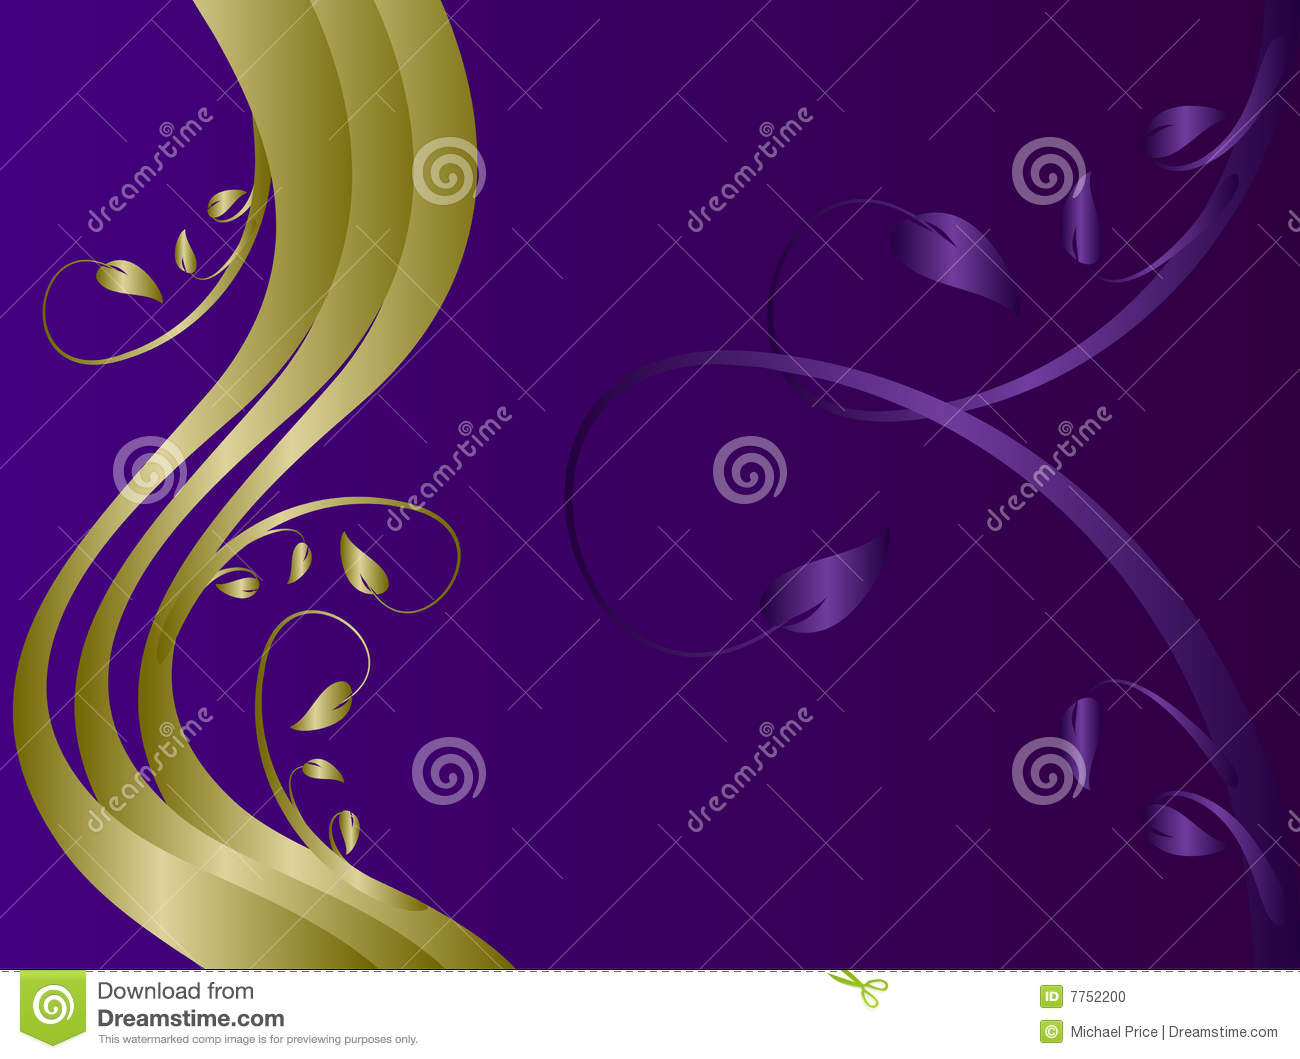 15 Purple And Gold Background Design Images   Purple and